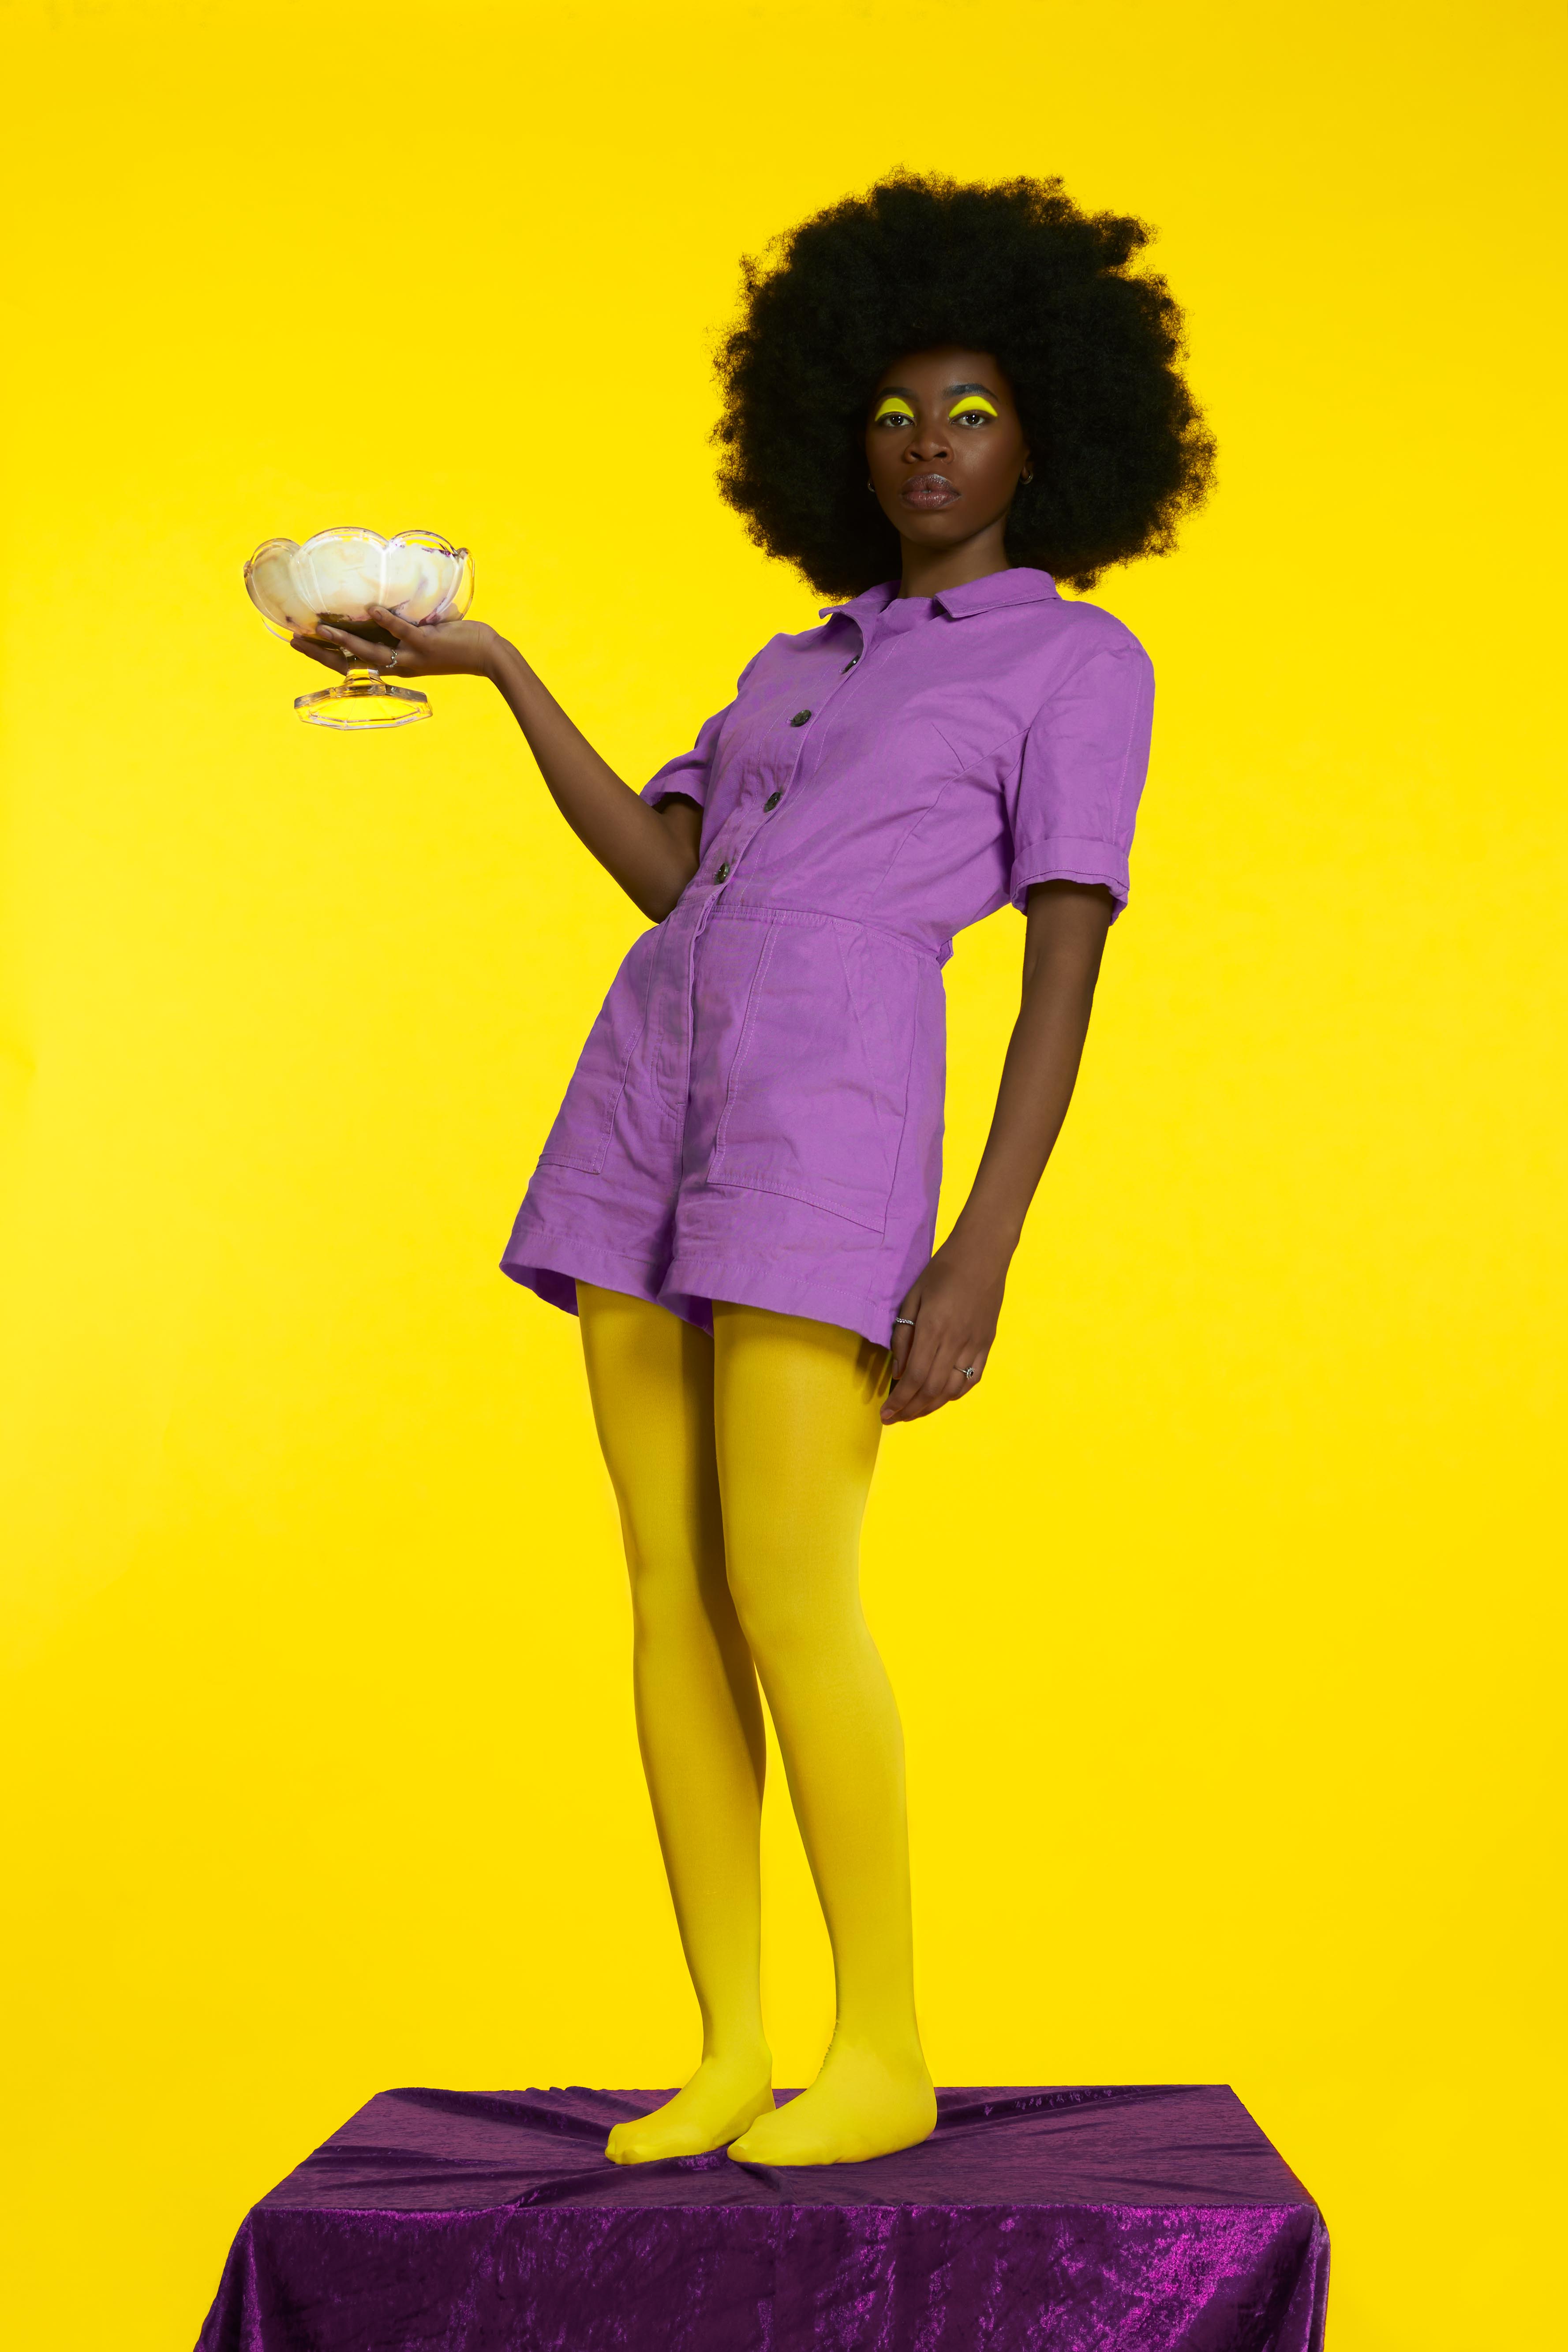 Fashion Editorial by Adam Billings showcasing a model dressed in purple against a yellow background.